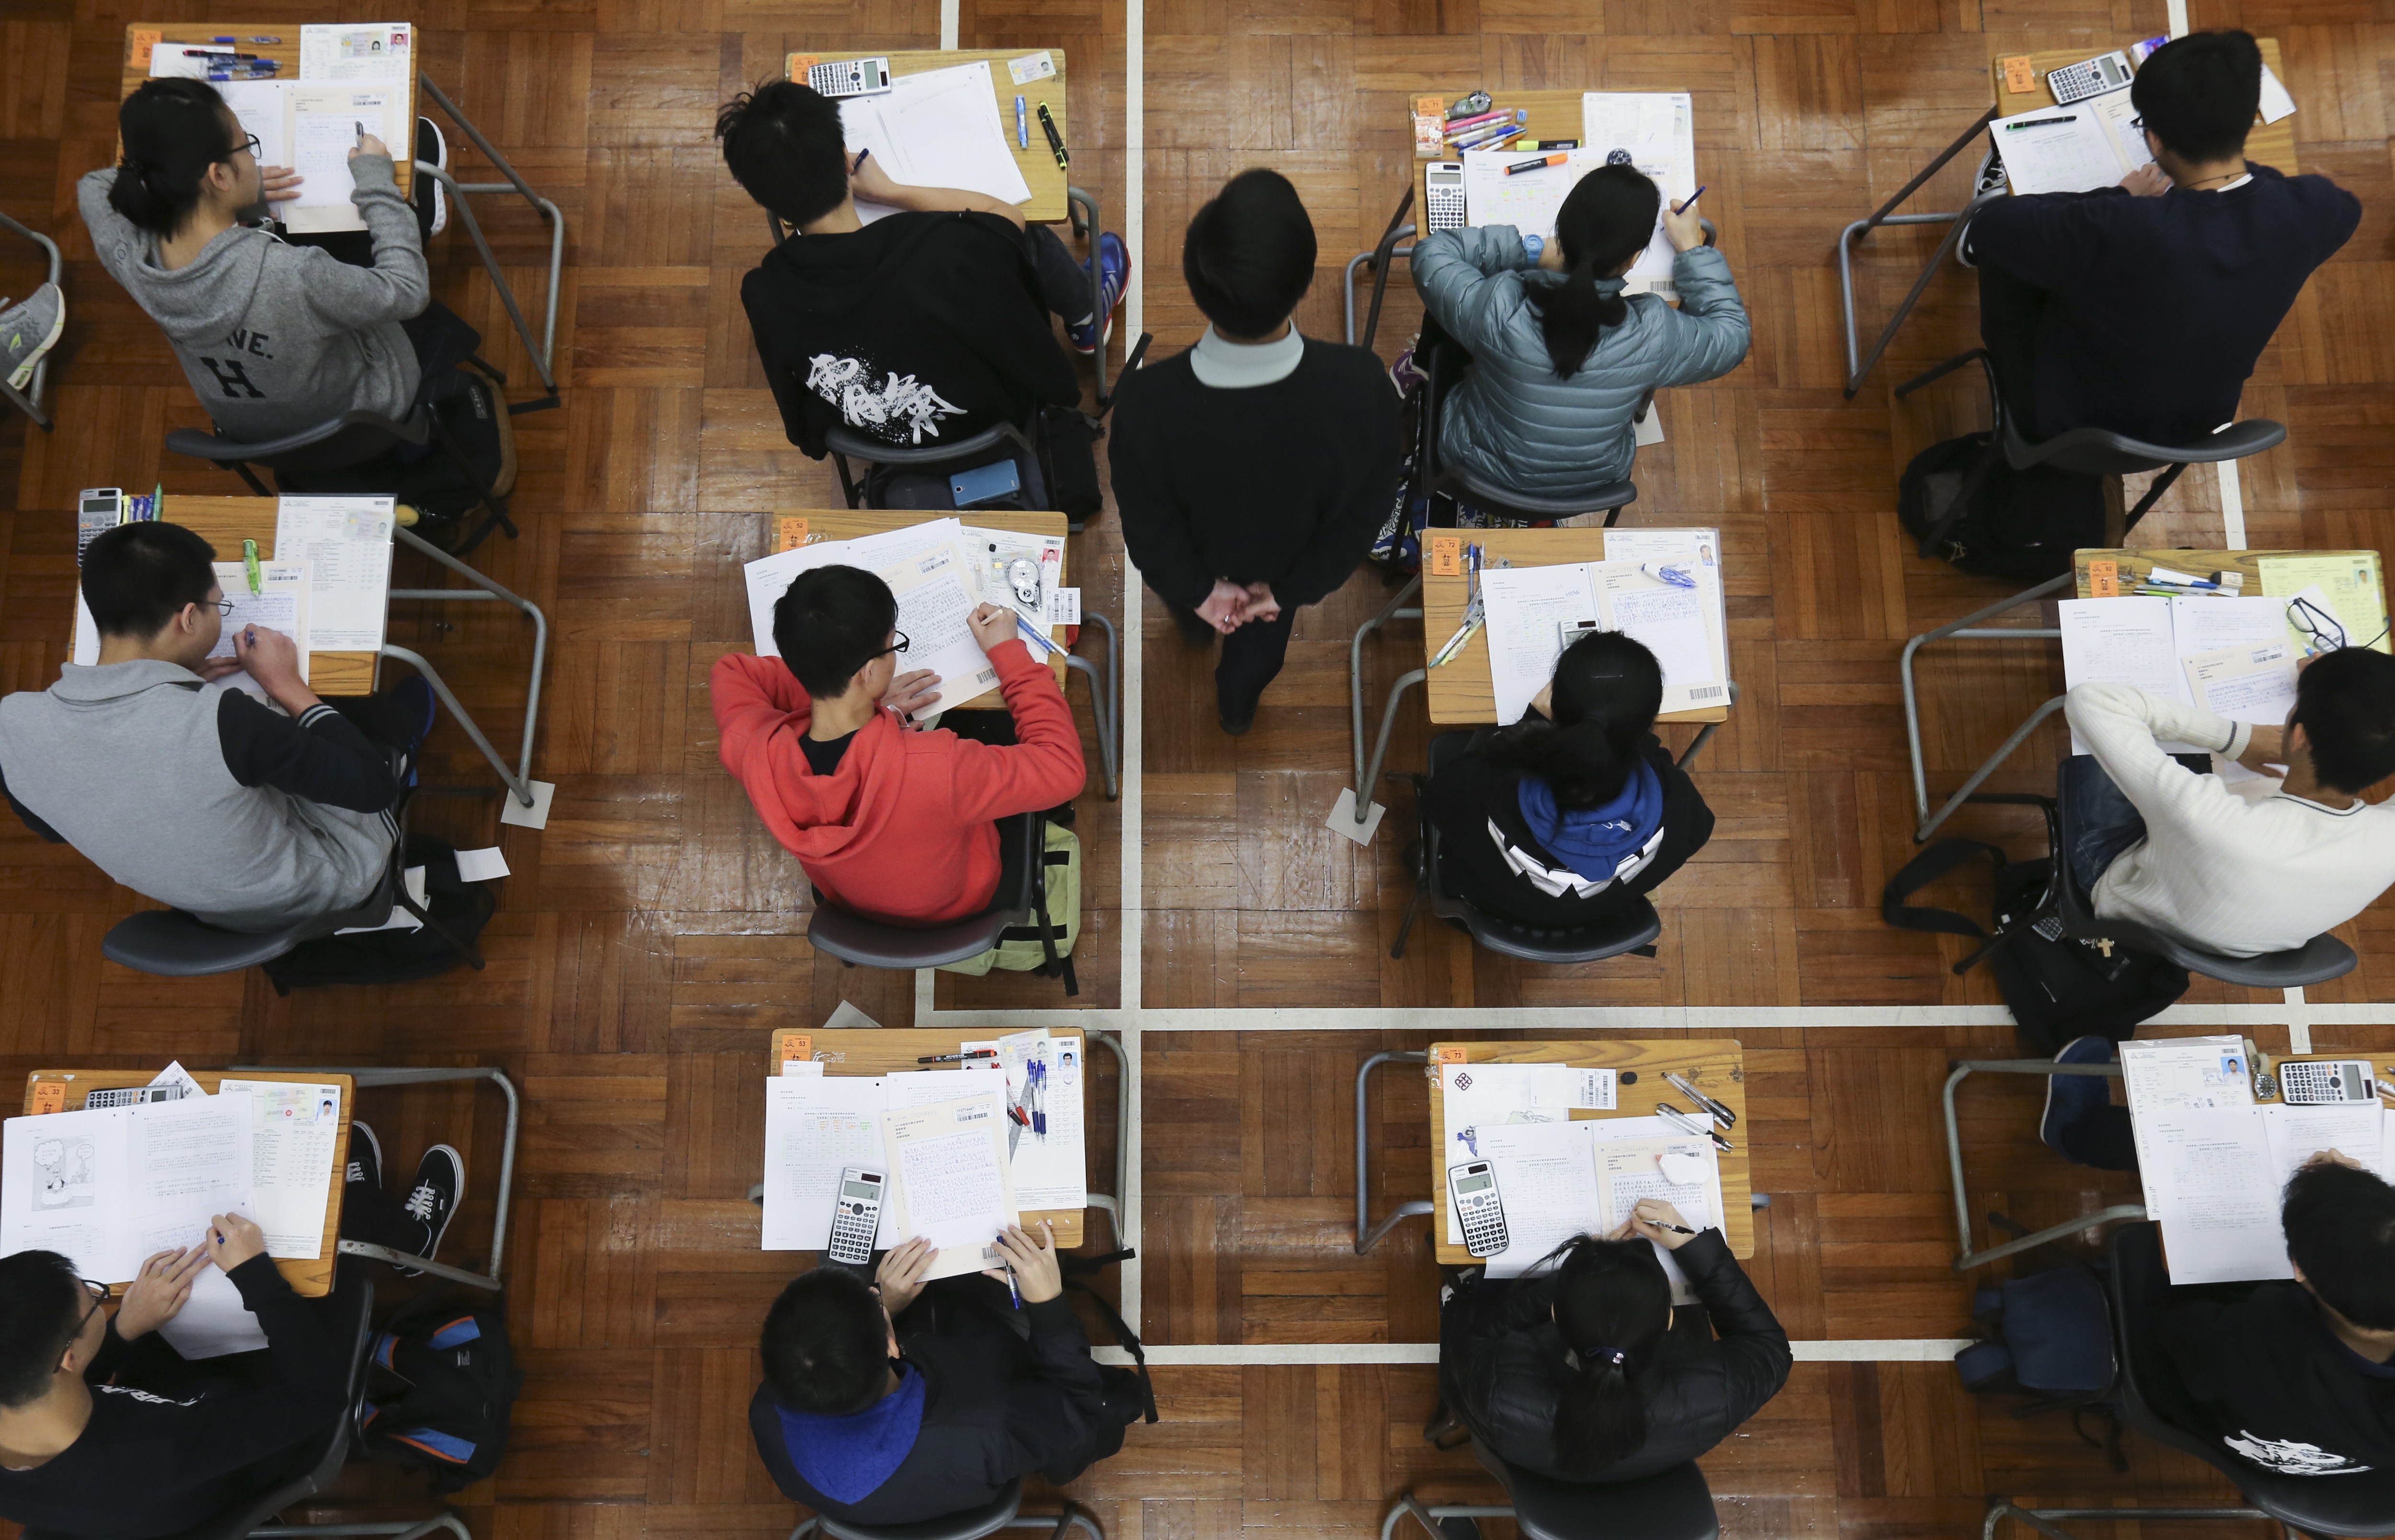 Students sit the Hong Kong Diploma of Secondary Education exam last year. Hong Kong’s education system places too much emphasis on tests and exams, and the constant testing is exacting a psychological toll on all concerned. Photo: Dickson Lee